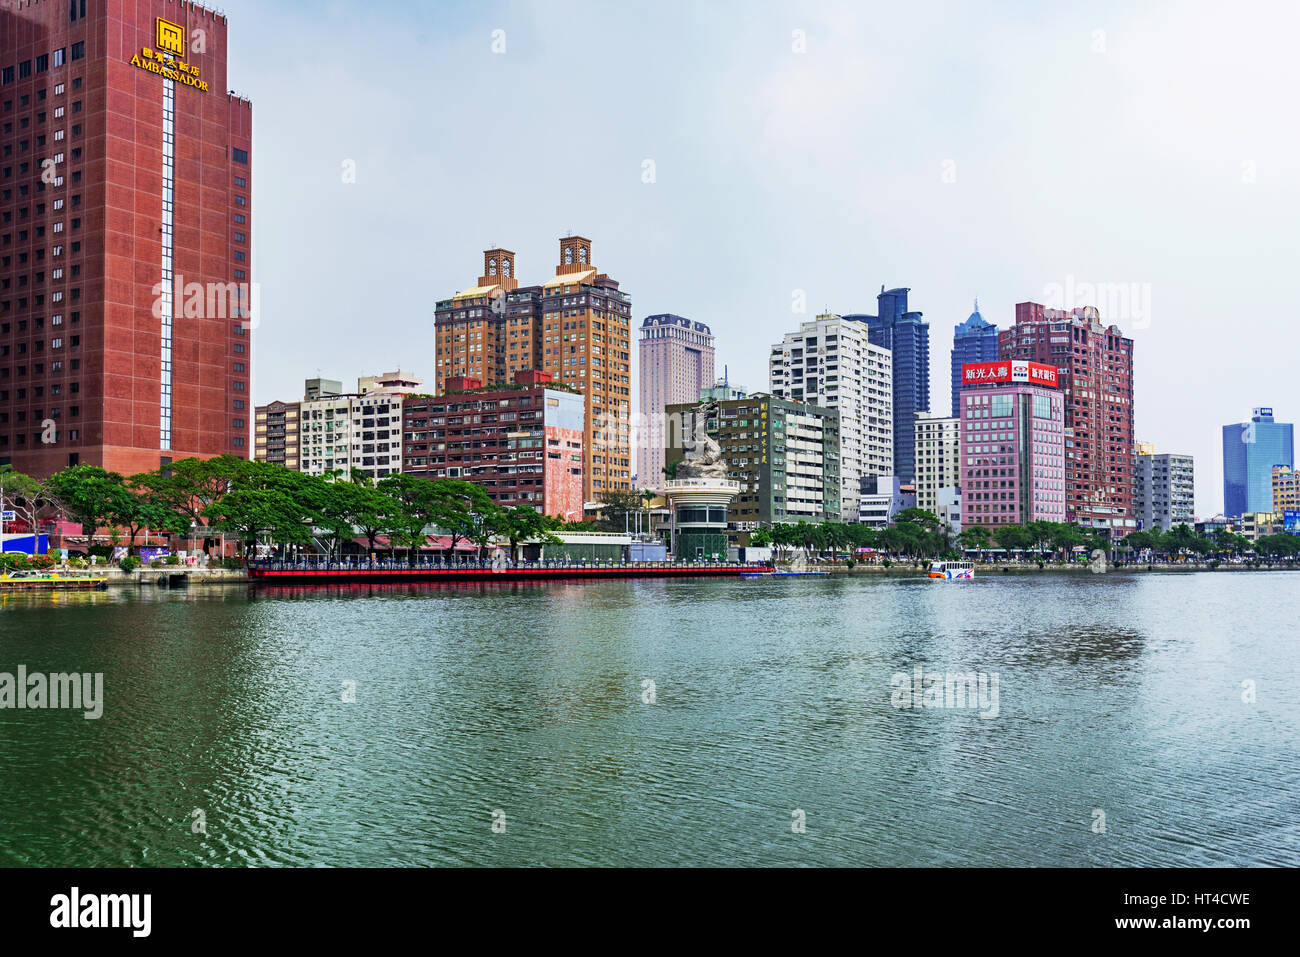 KAOHSIUNG, TAIWAN - NOVEMBER 26: This is a view Kaoshiung financial district riverside buildings and hotels on November 26, 2016 in Kaohsiung Stock Photo